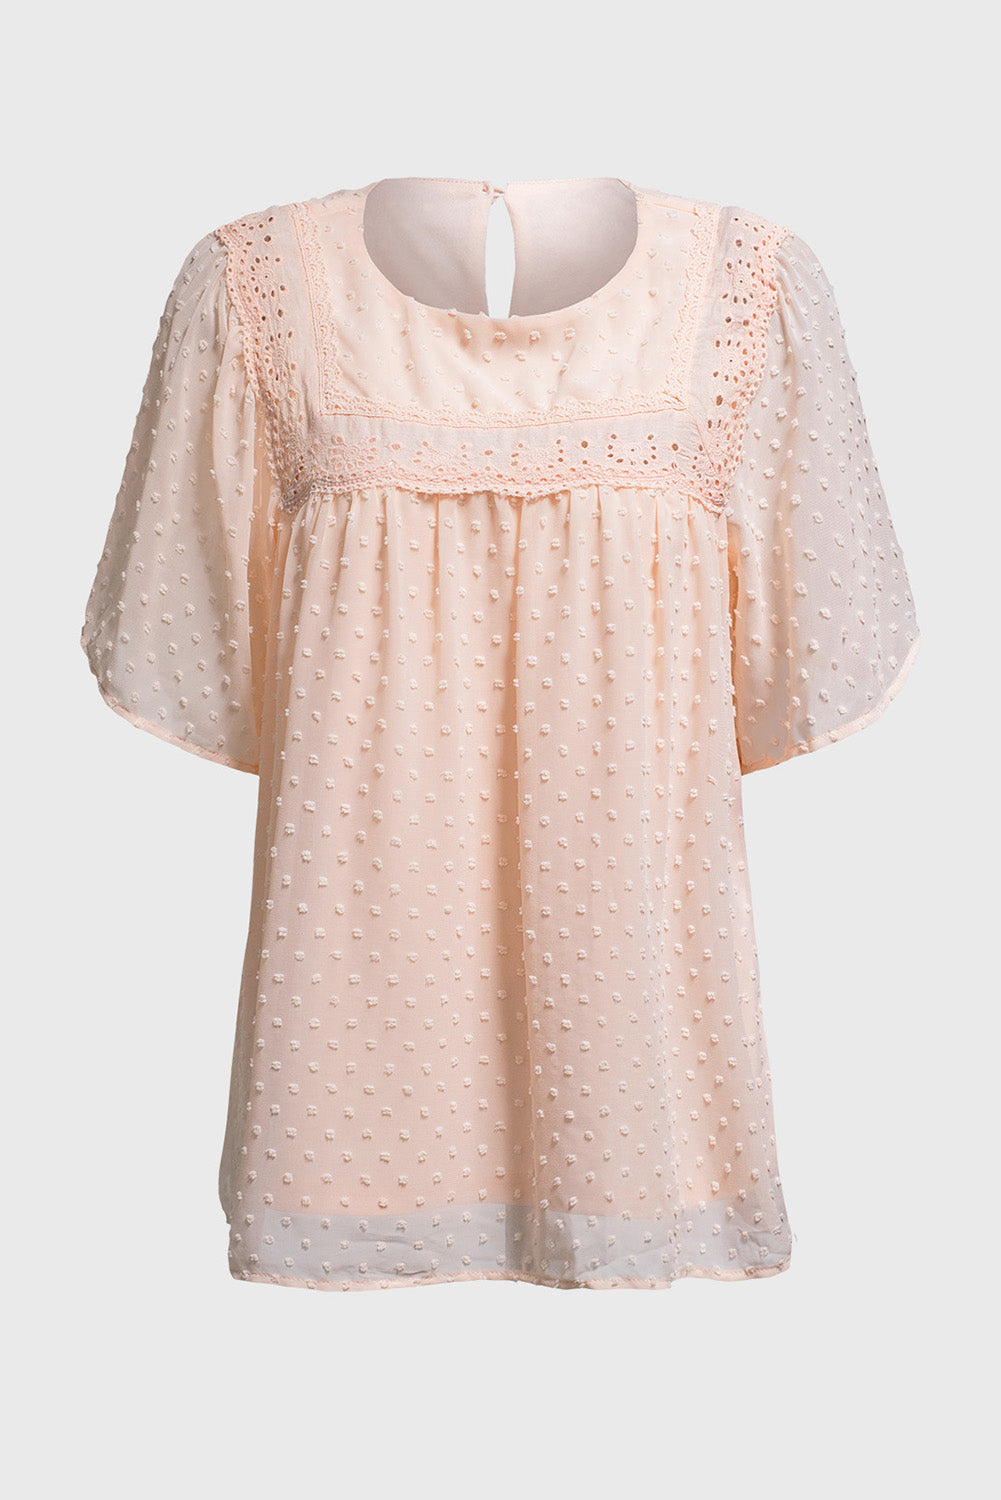 Apricot Flutter Sleeves Sheer Textured Babydoll Top Family T-shirts JT's Designer Fashion